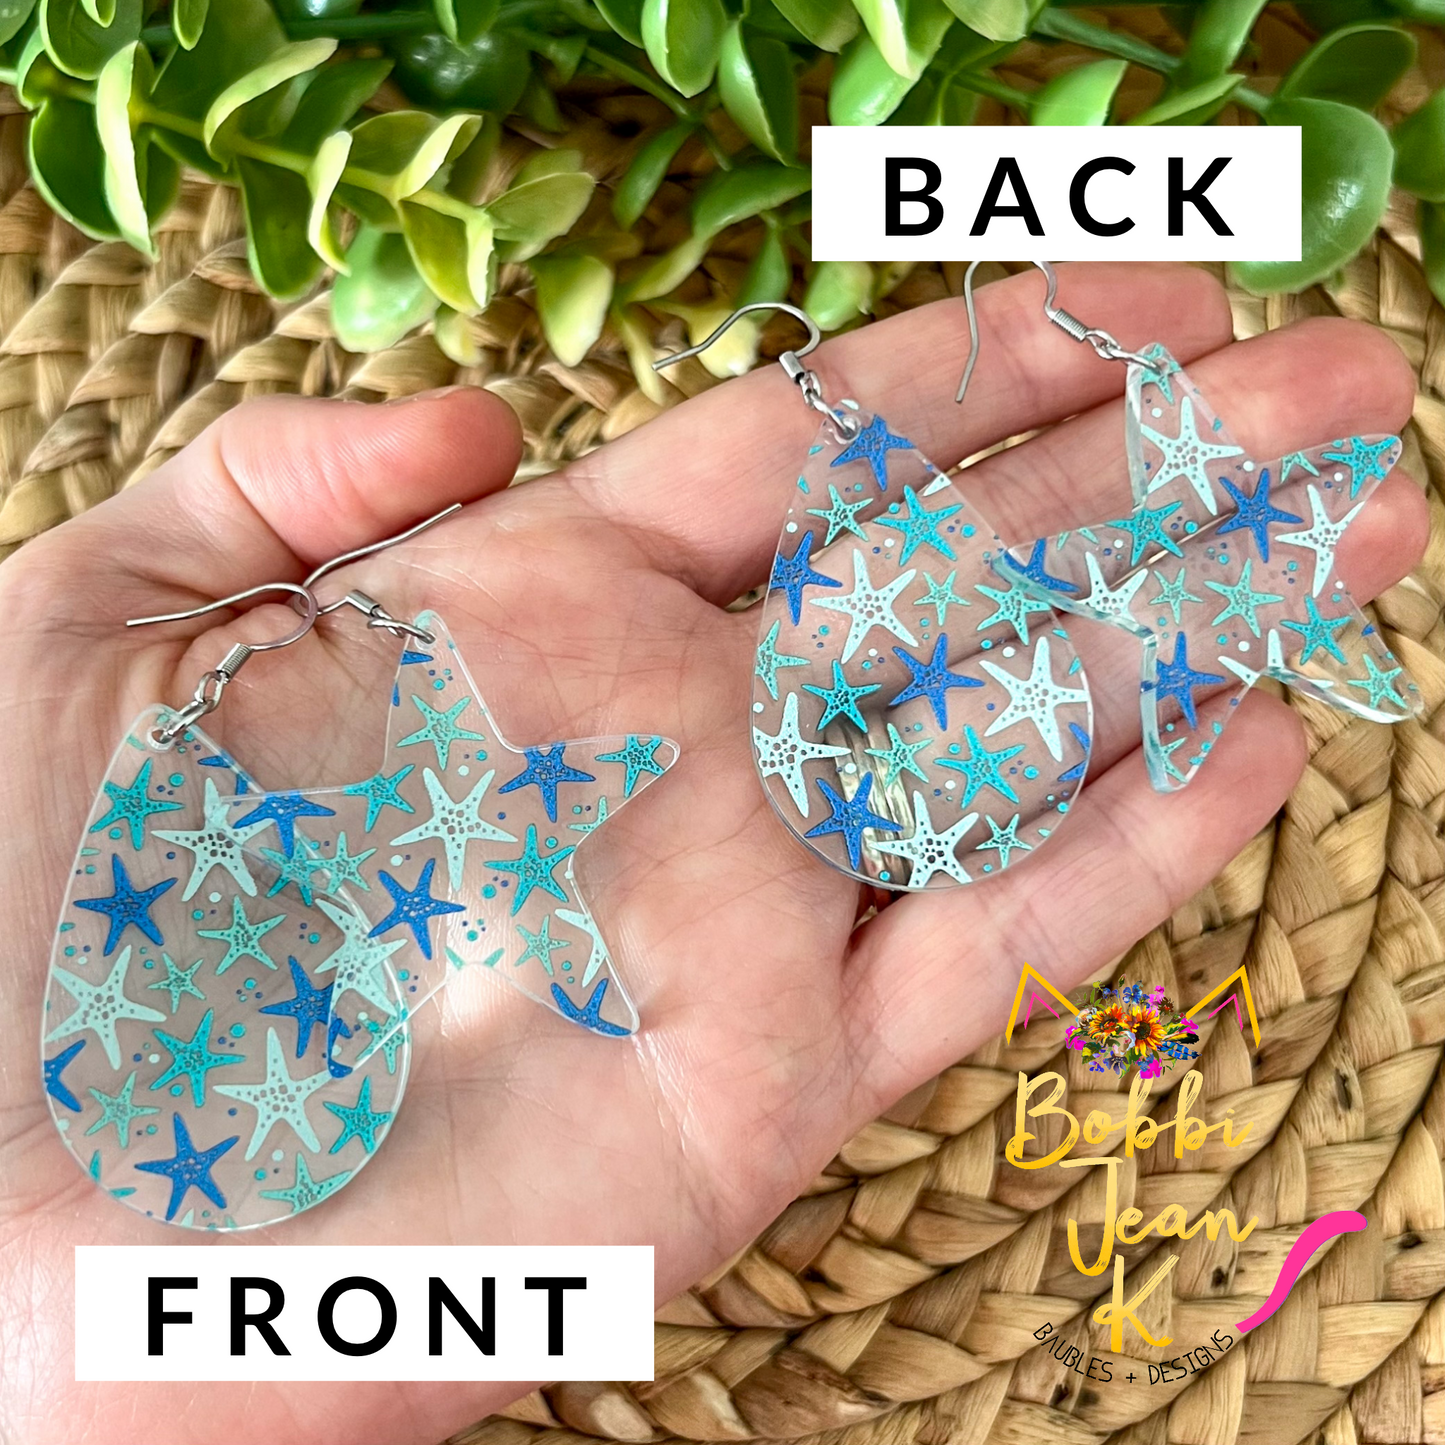 Starfish Print Acrylic Earrings: Choose From 2 Styles